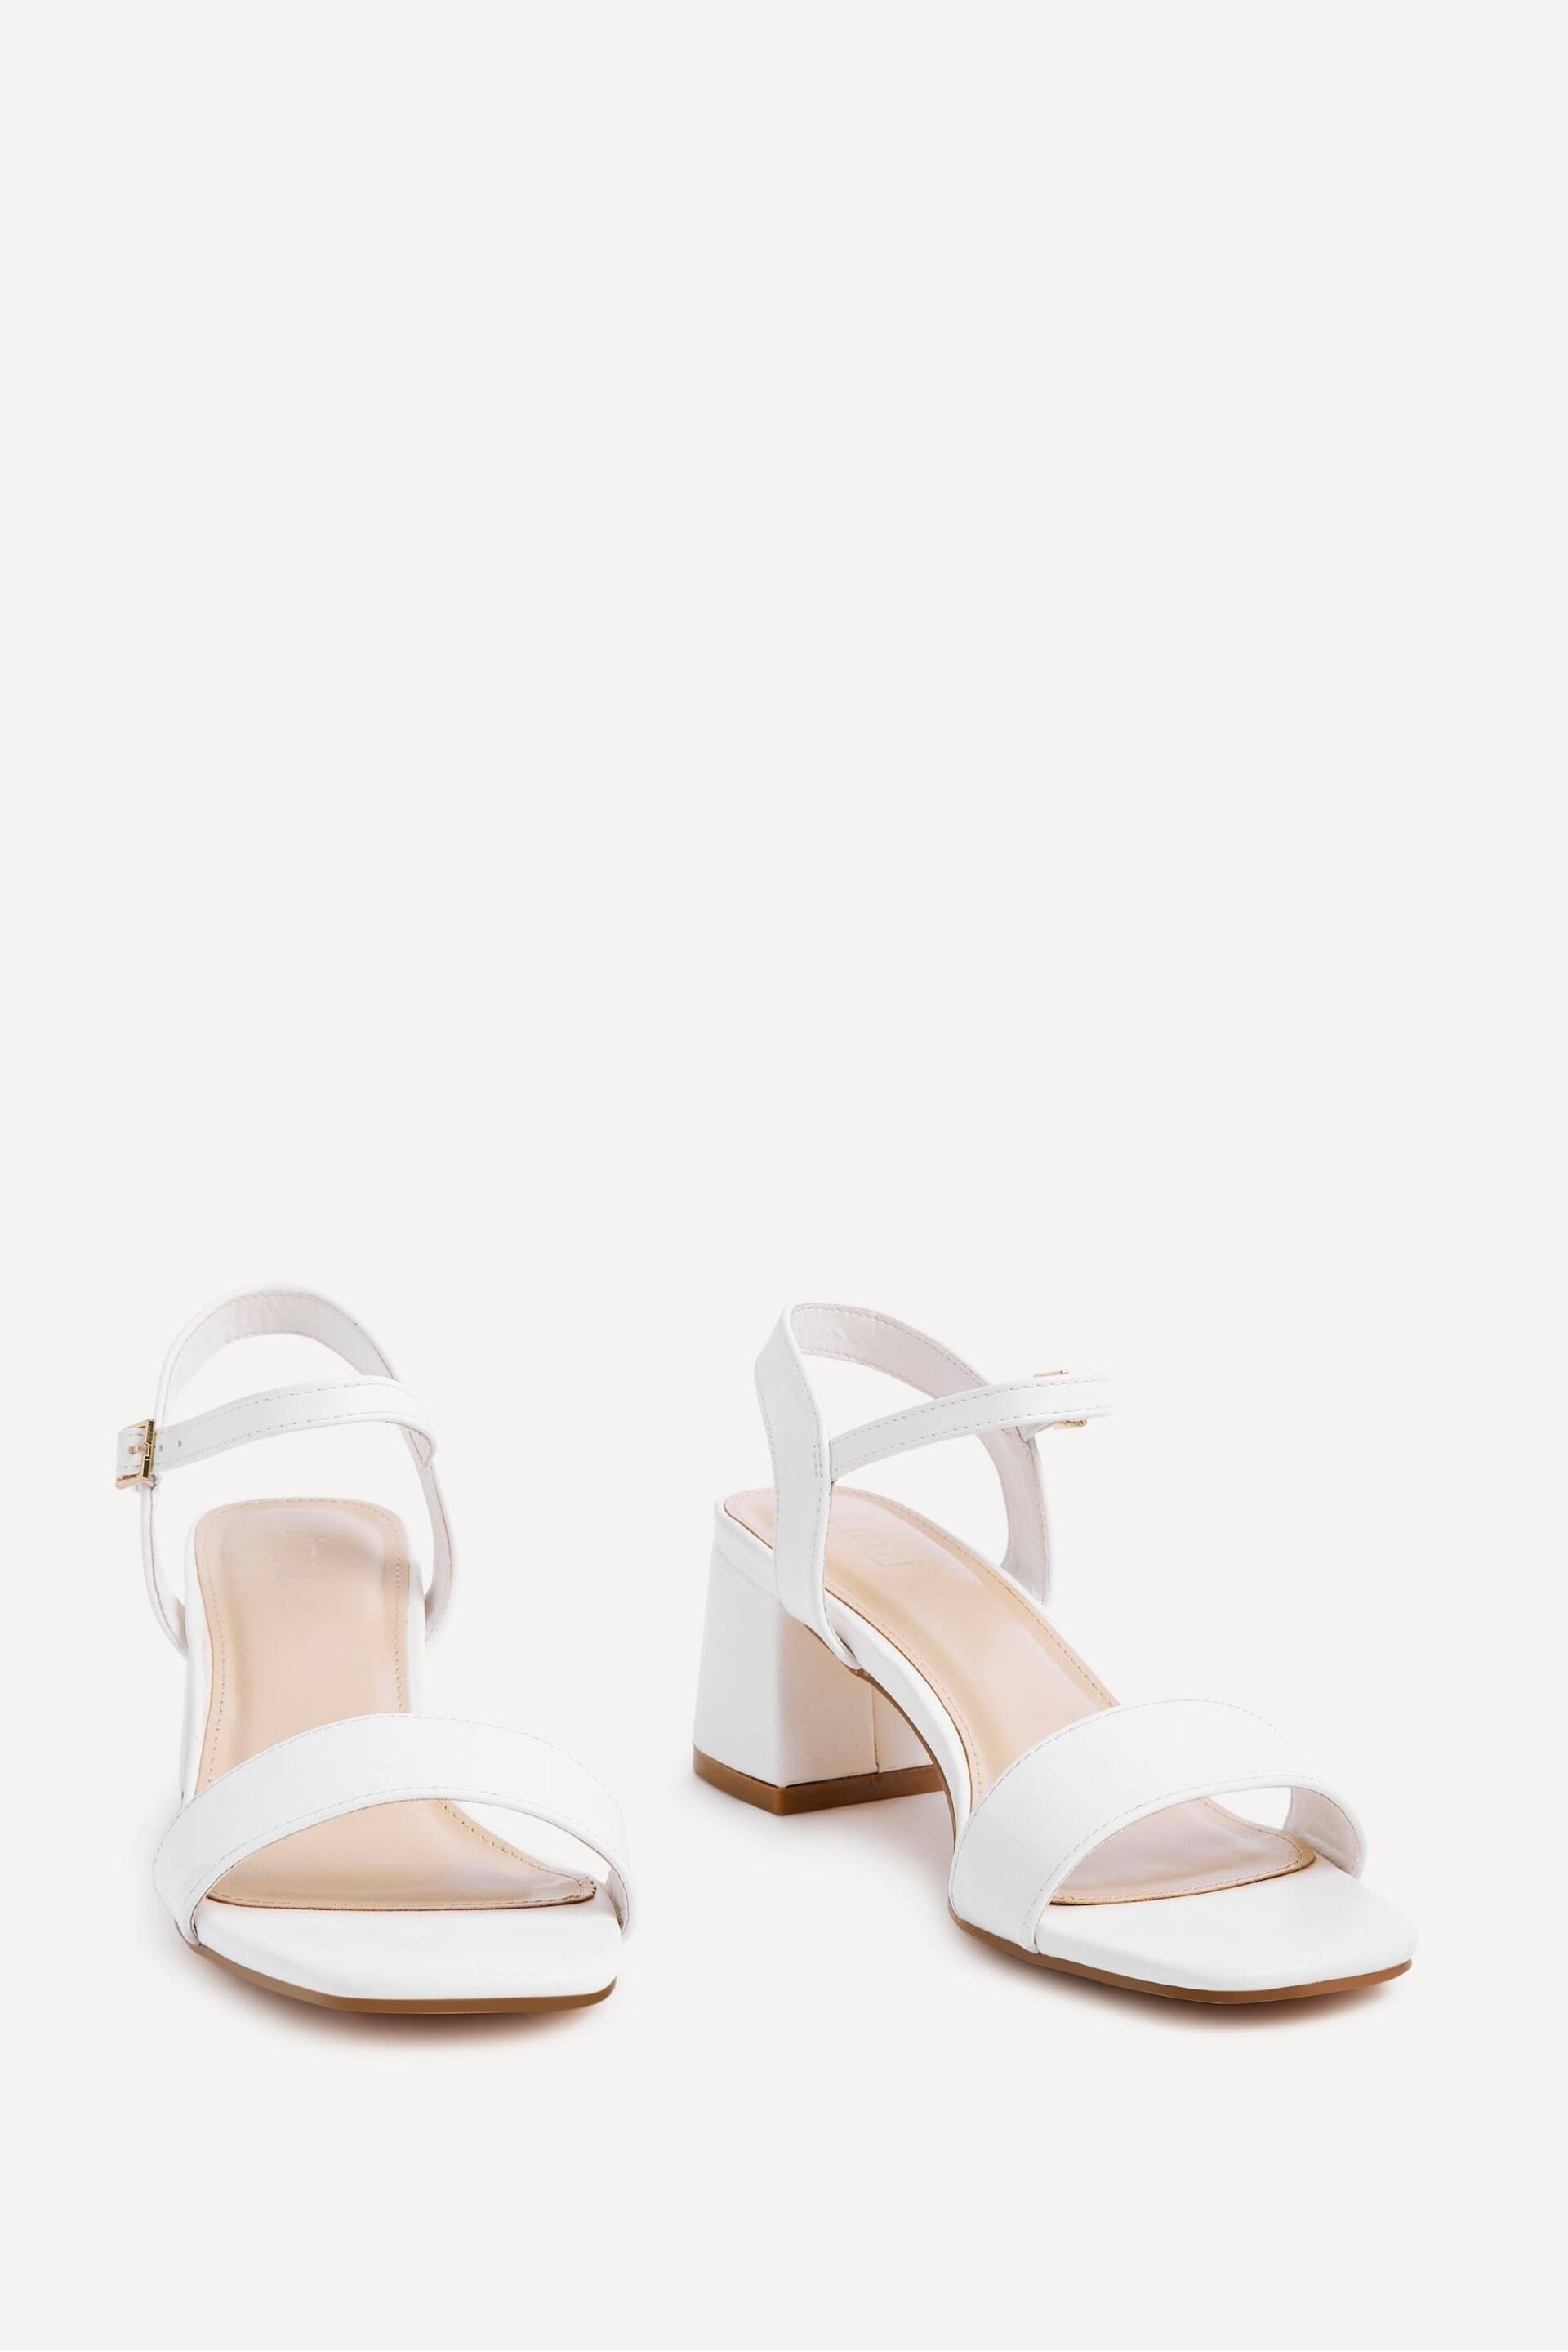 Linzi White Darcie Barely There Block Heeled Sandals - Image 3 of 4